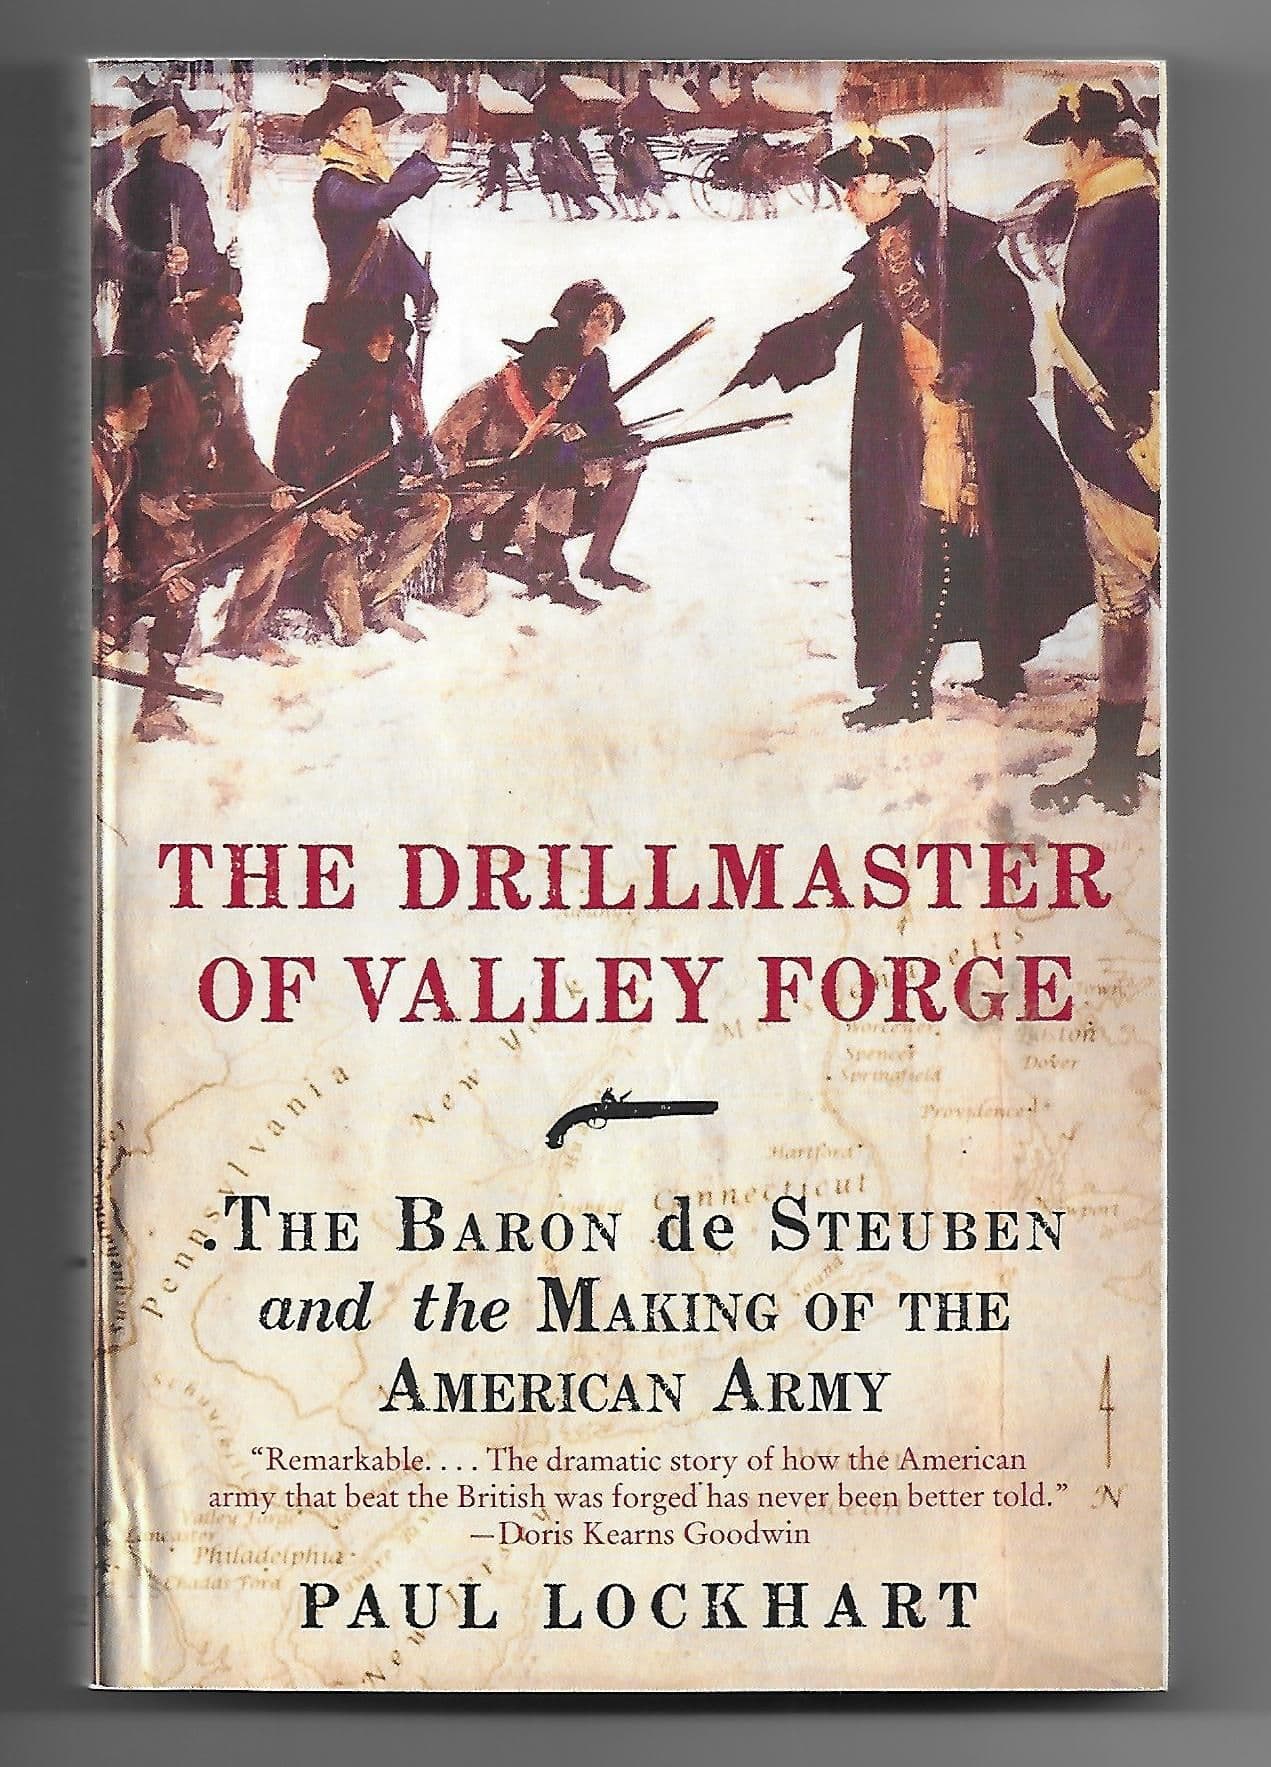 The Drillmaster of Valley Forge, The Baron De Steuben and the Making of the American Army